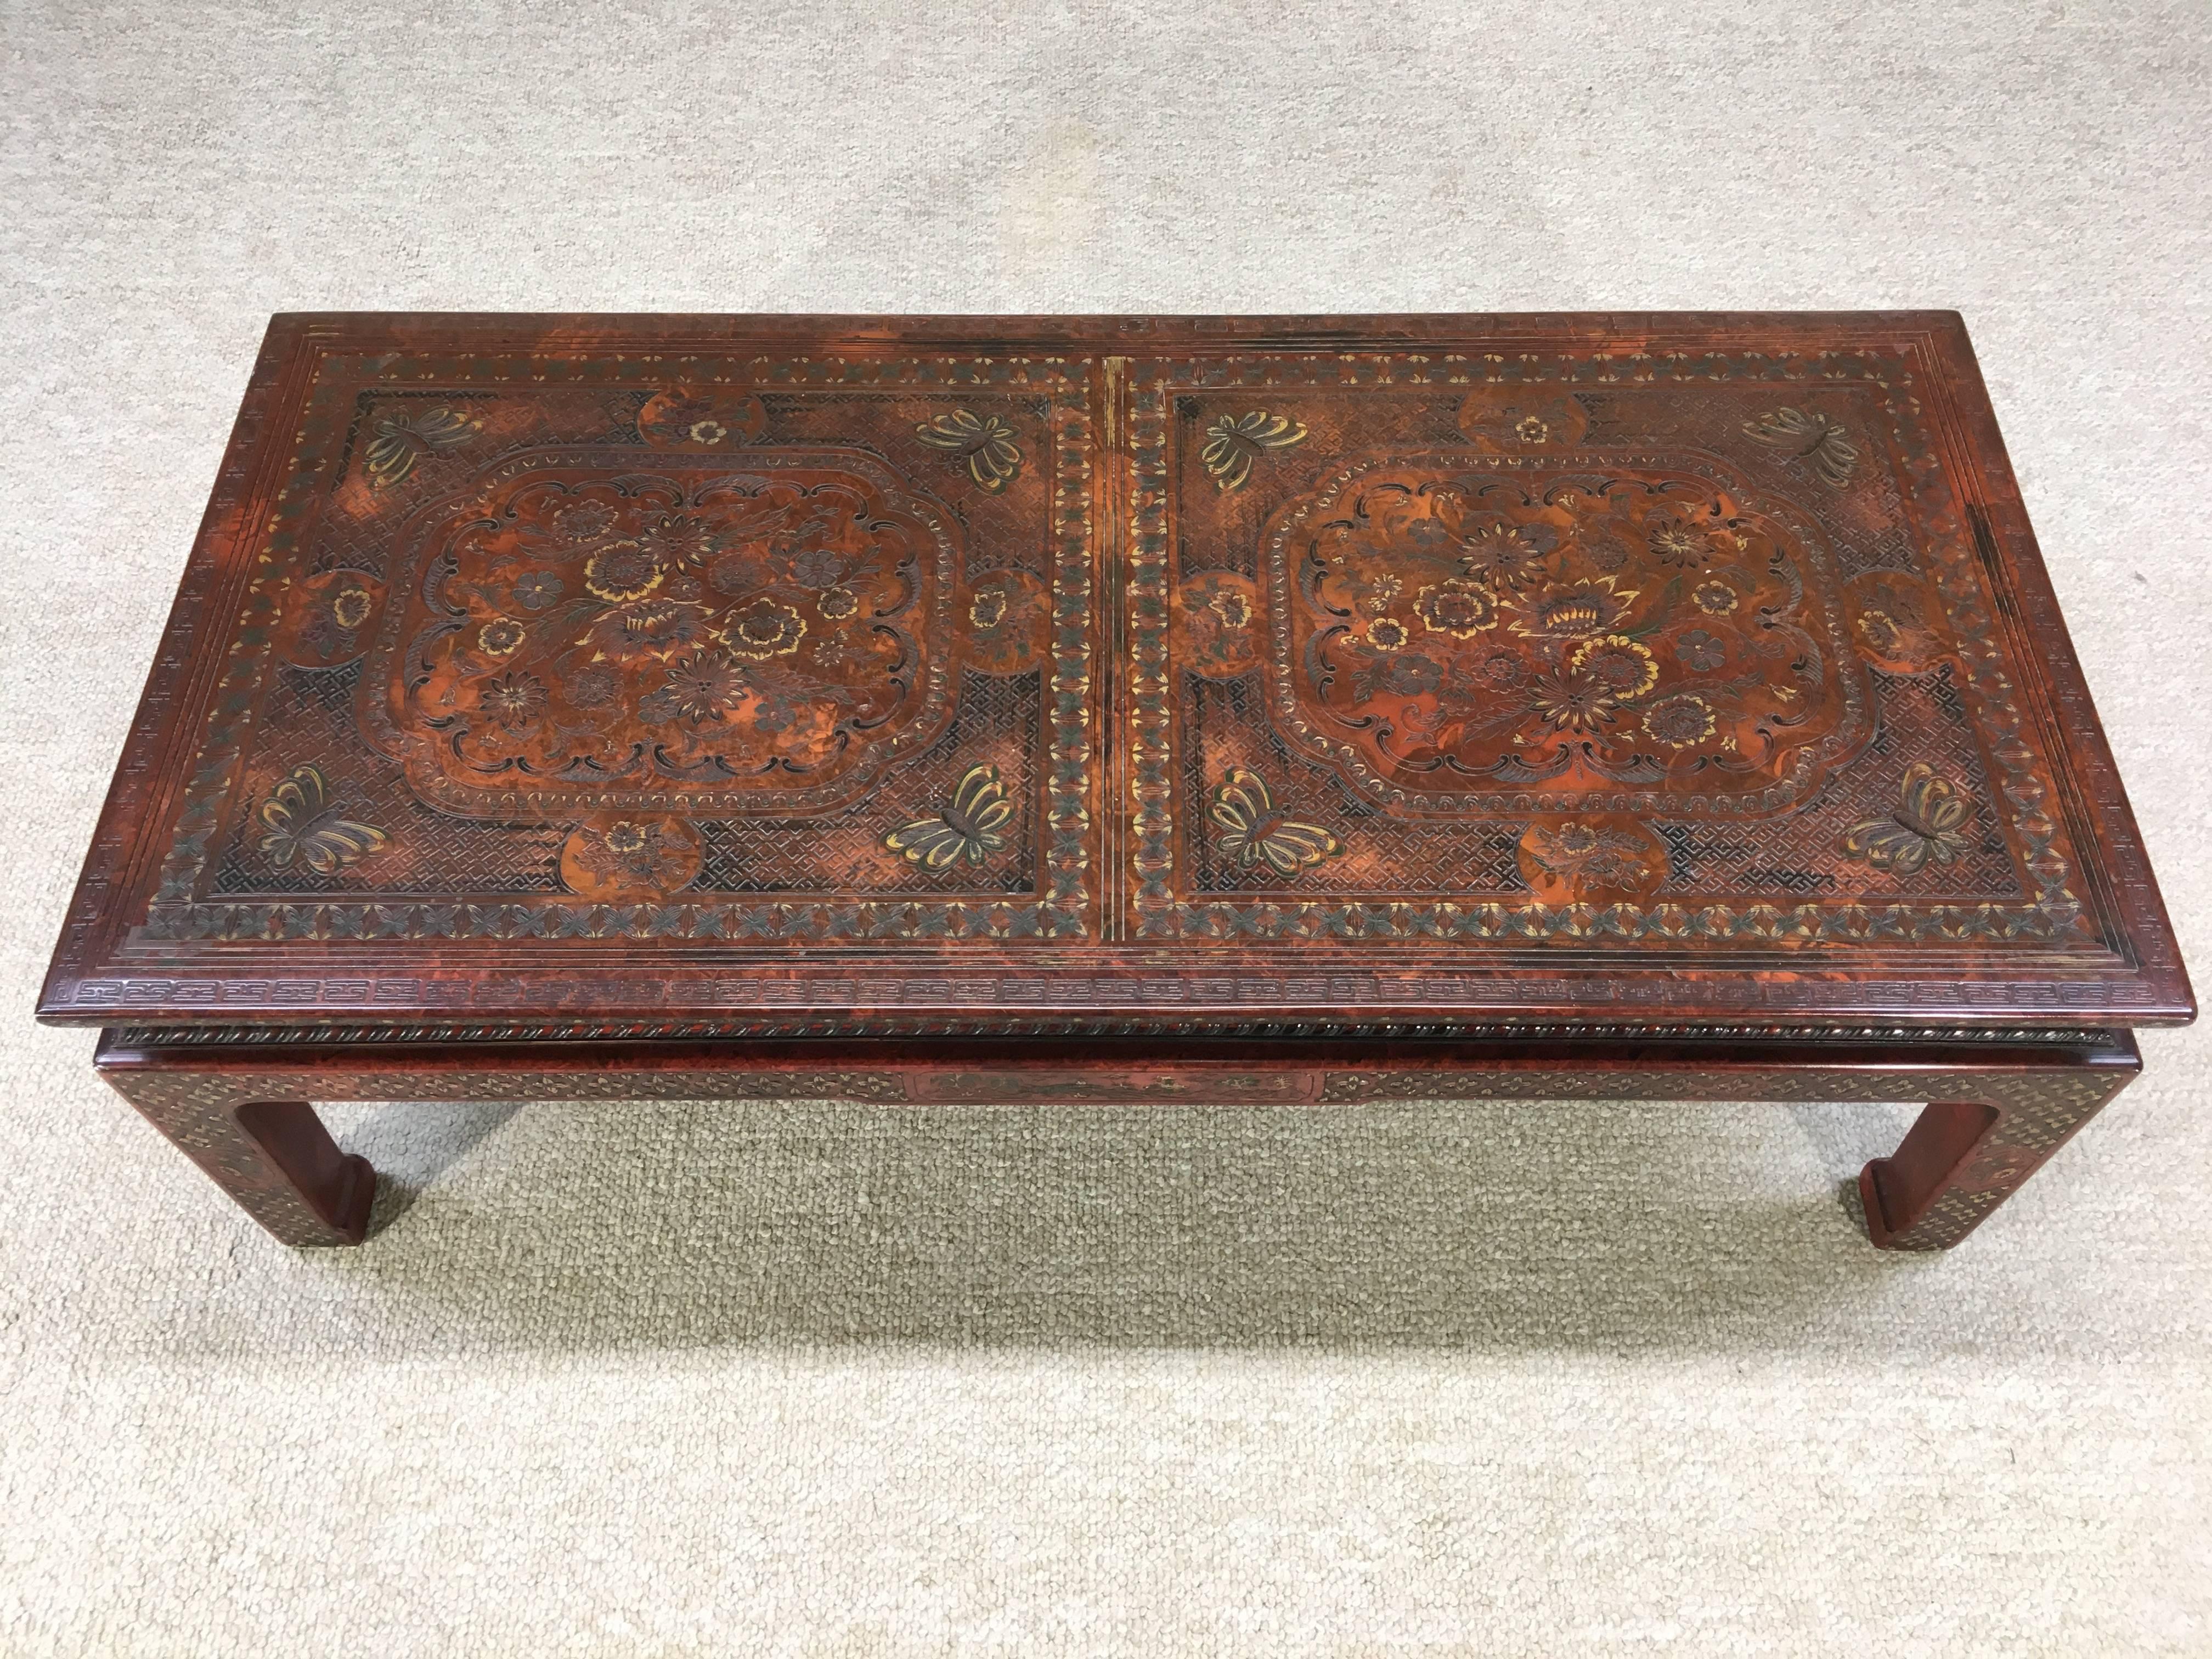 A rare and incredibly beautiful Chinoiserie coffee table designed by Mario Buatta for John Widdicomb circa 1960 having inlaid Chinese artwork including scenes throughout.